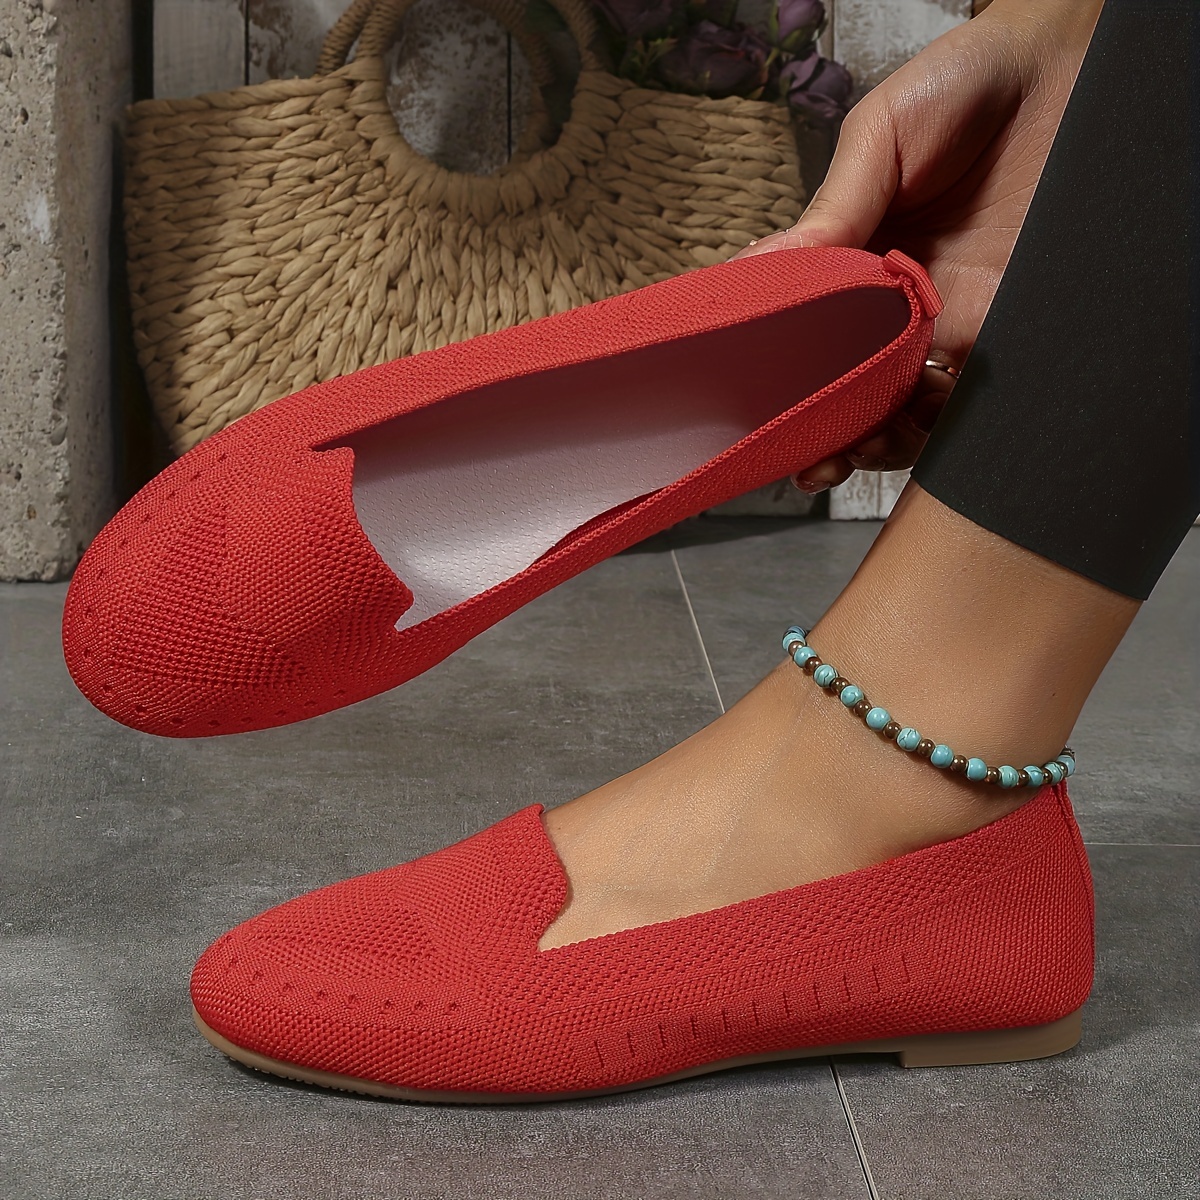  Black Flats Shoes for Women Cute Round Toe Red Ballet Flats  Comfortable Slip-ons Loafers Birdies Shoes Dressy Low Heel | Shoes